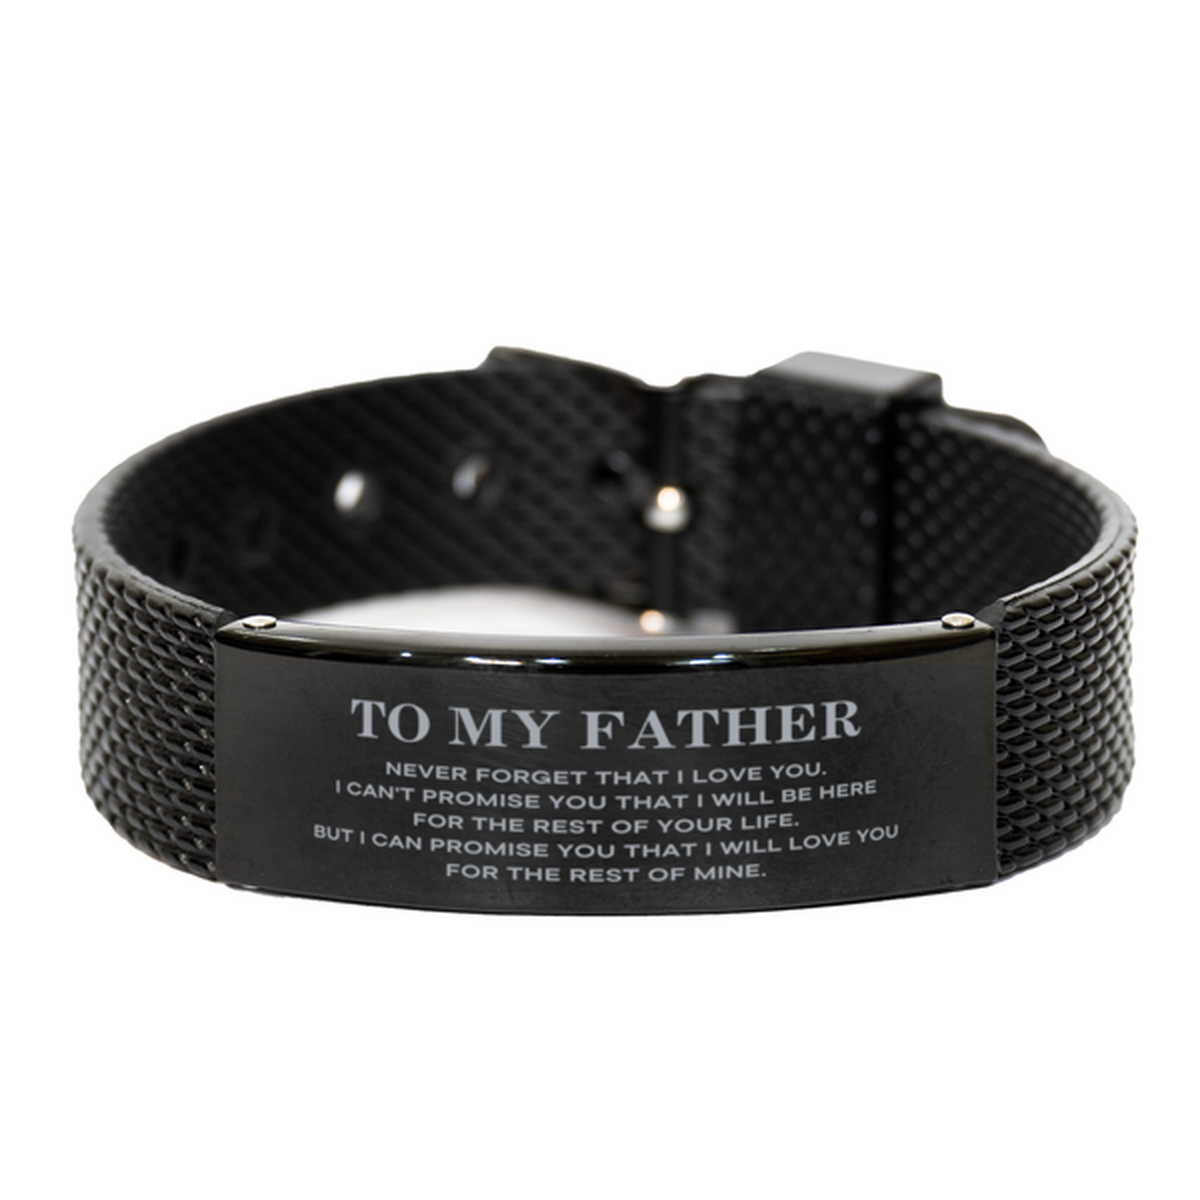 To My Father Gifts, I will love you for the rest of mine, Love Father Bracelet, Birthday Christmas Unique Black Shark Mesh Bracelet For Father